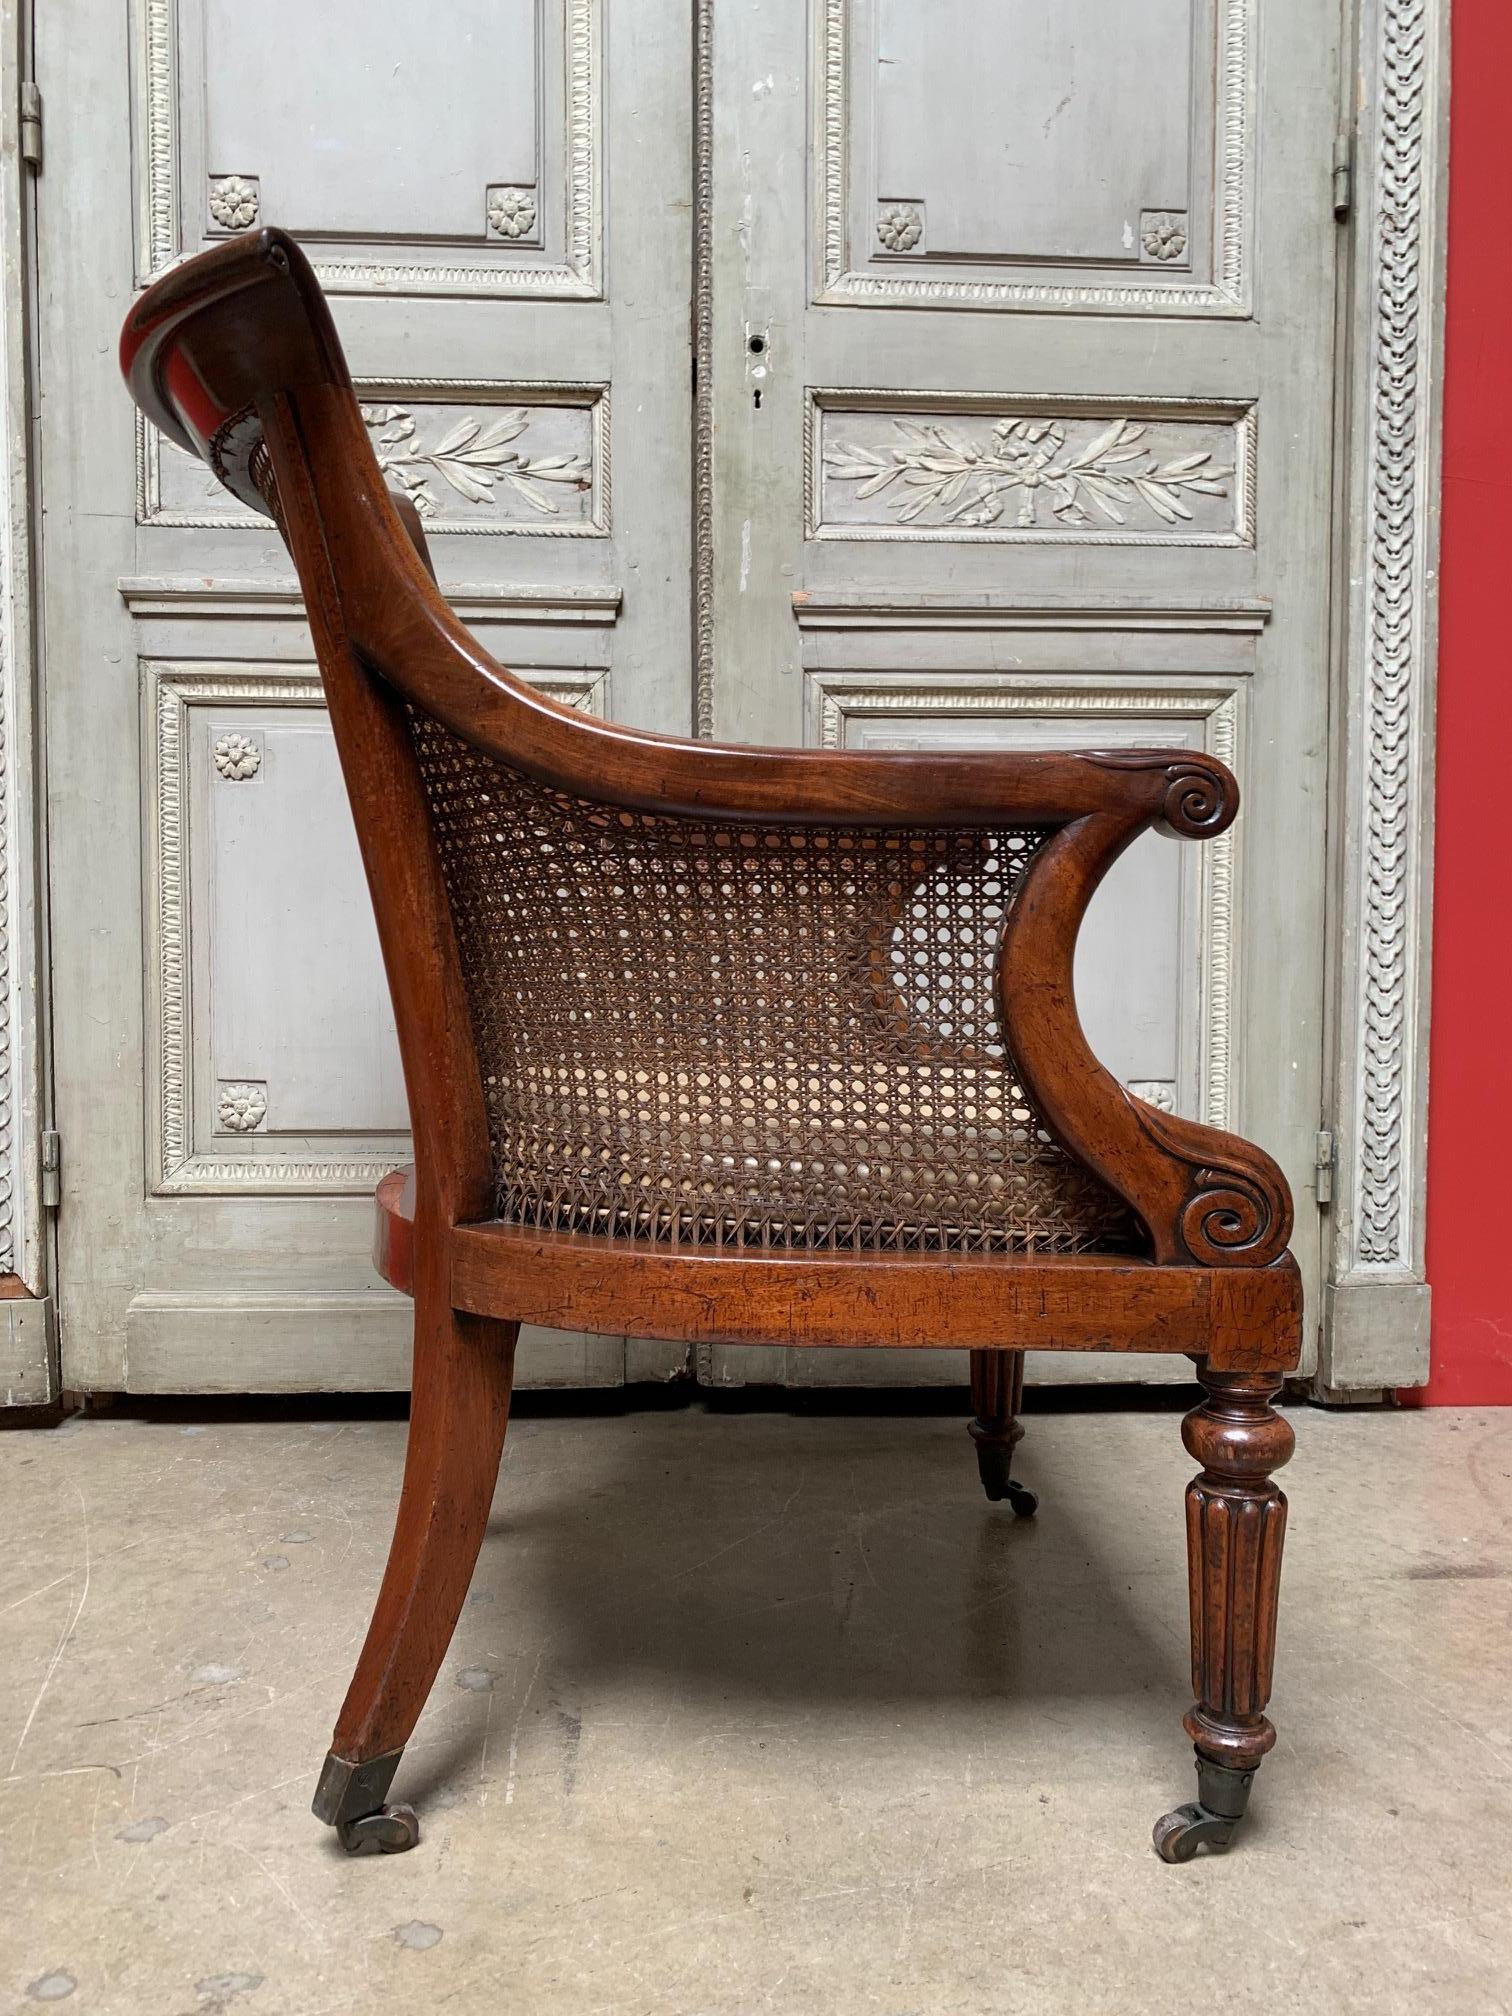 Regency 19th Century English William IV Walnut Library Chair with Cane